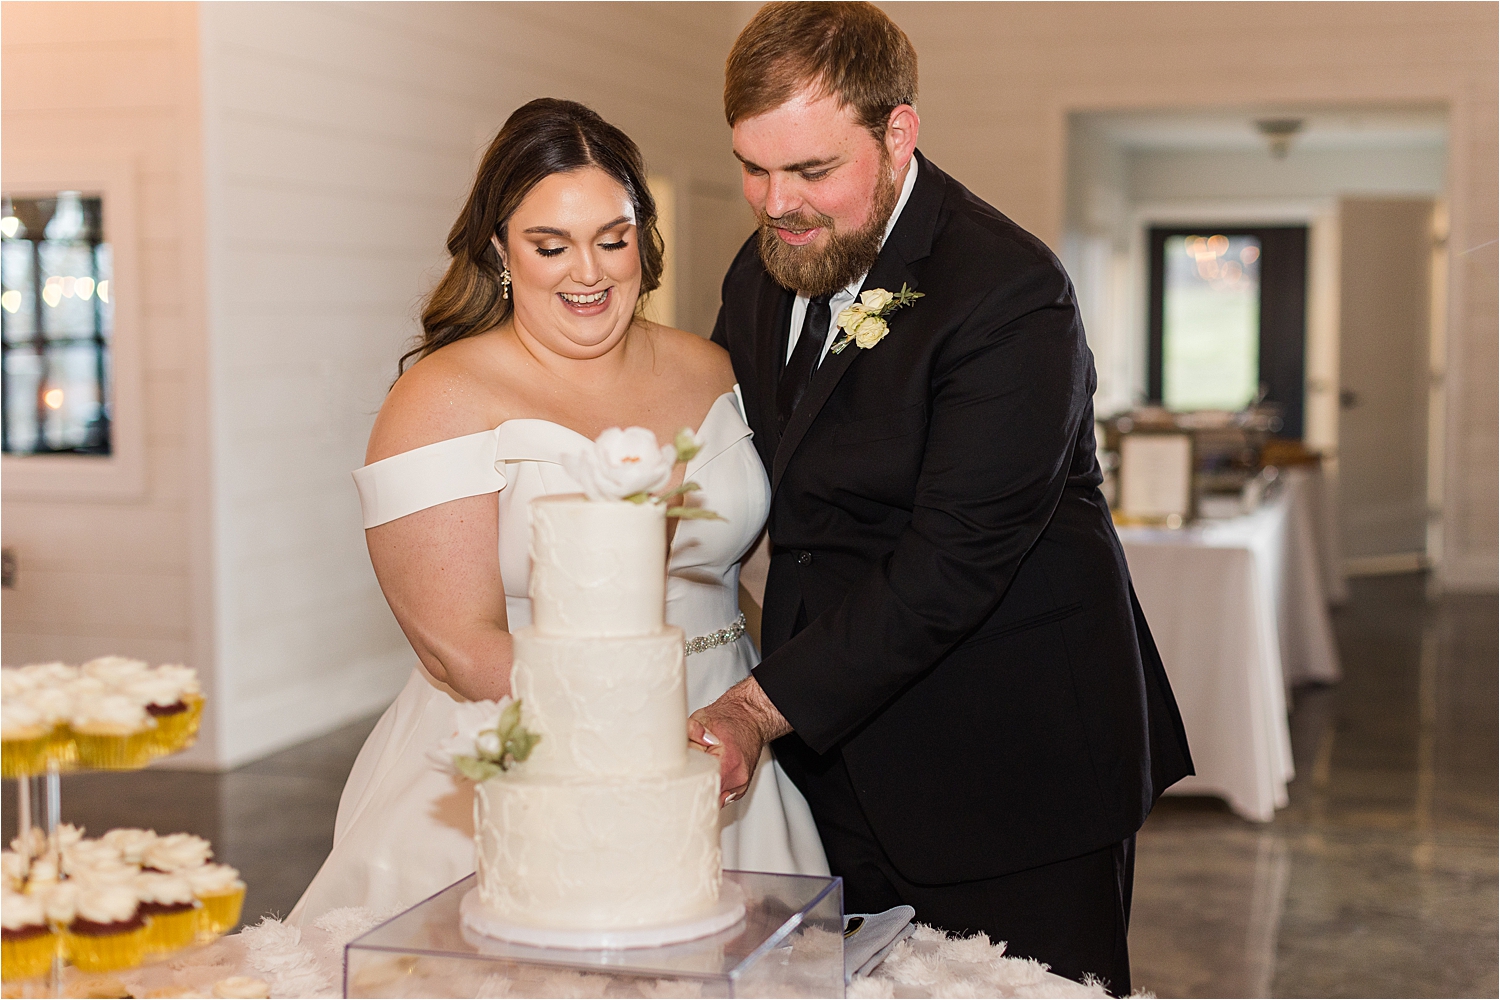 Brandi and Wade cutting their cake at their Dream Point Ranch Wedding reception.